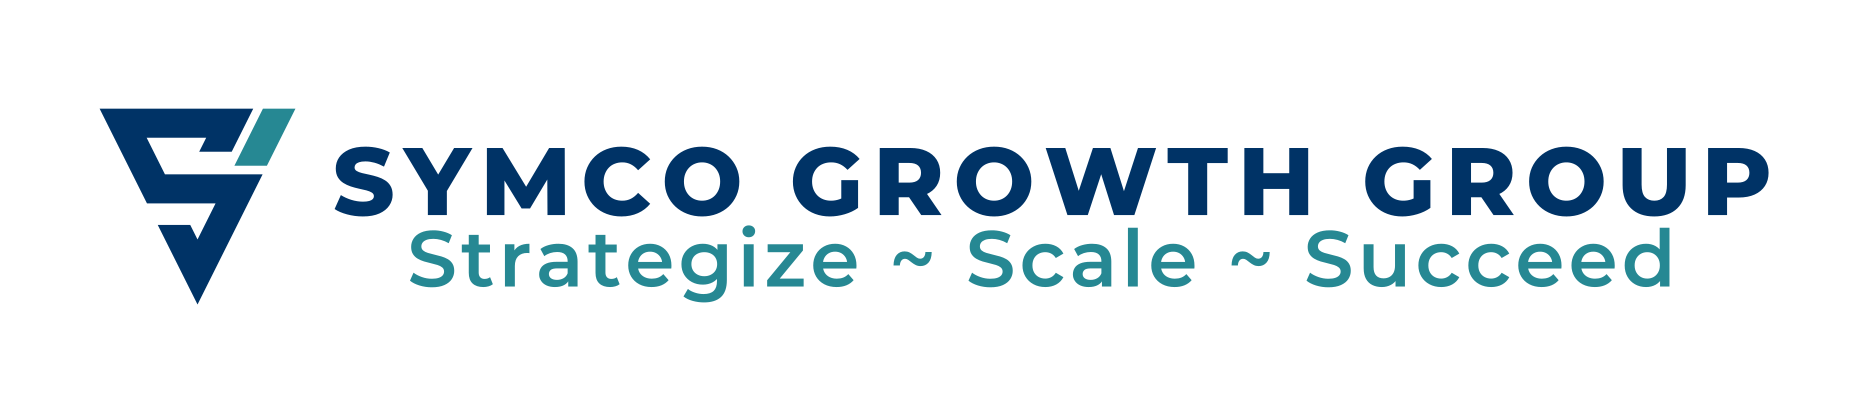 Symco Growth Group logo with tagline of "Strategize - Scale - Succeed"